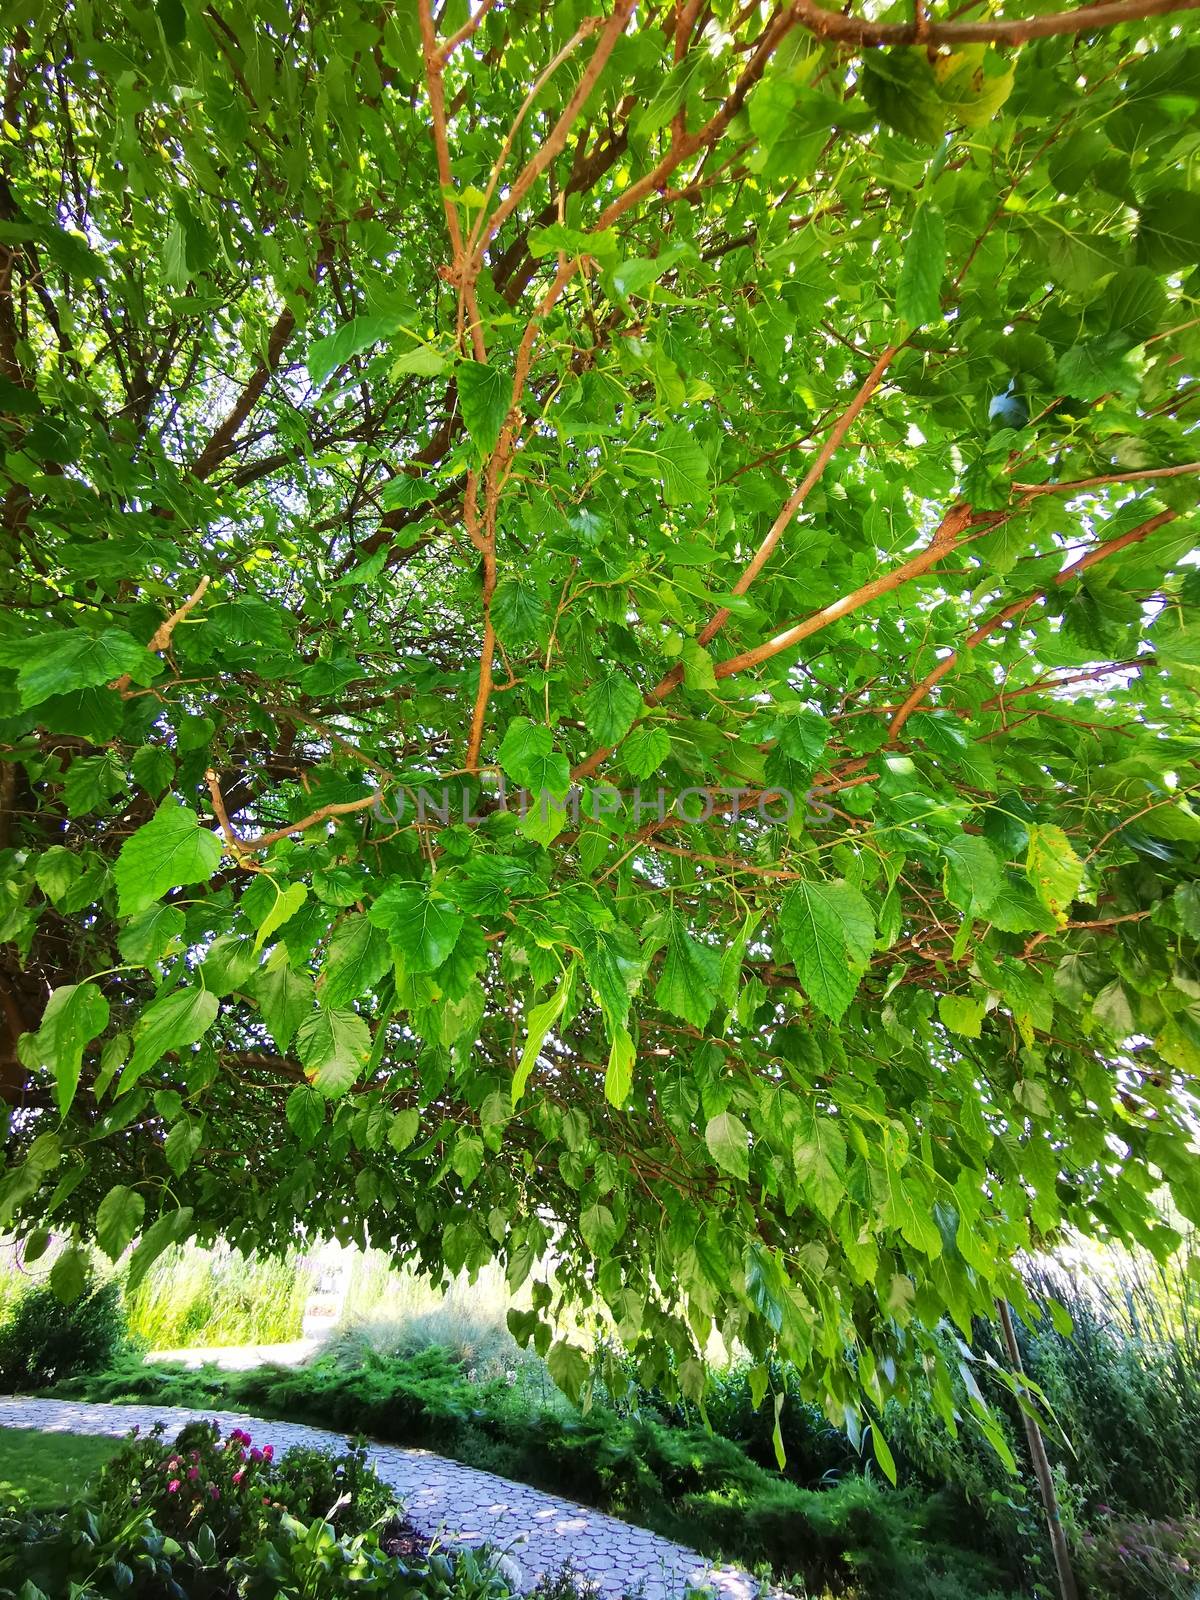 A plant growing in a tree. High quality photo